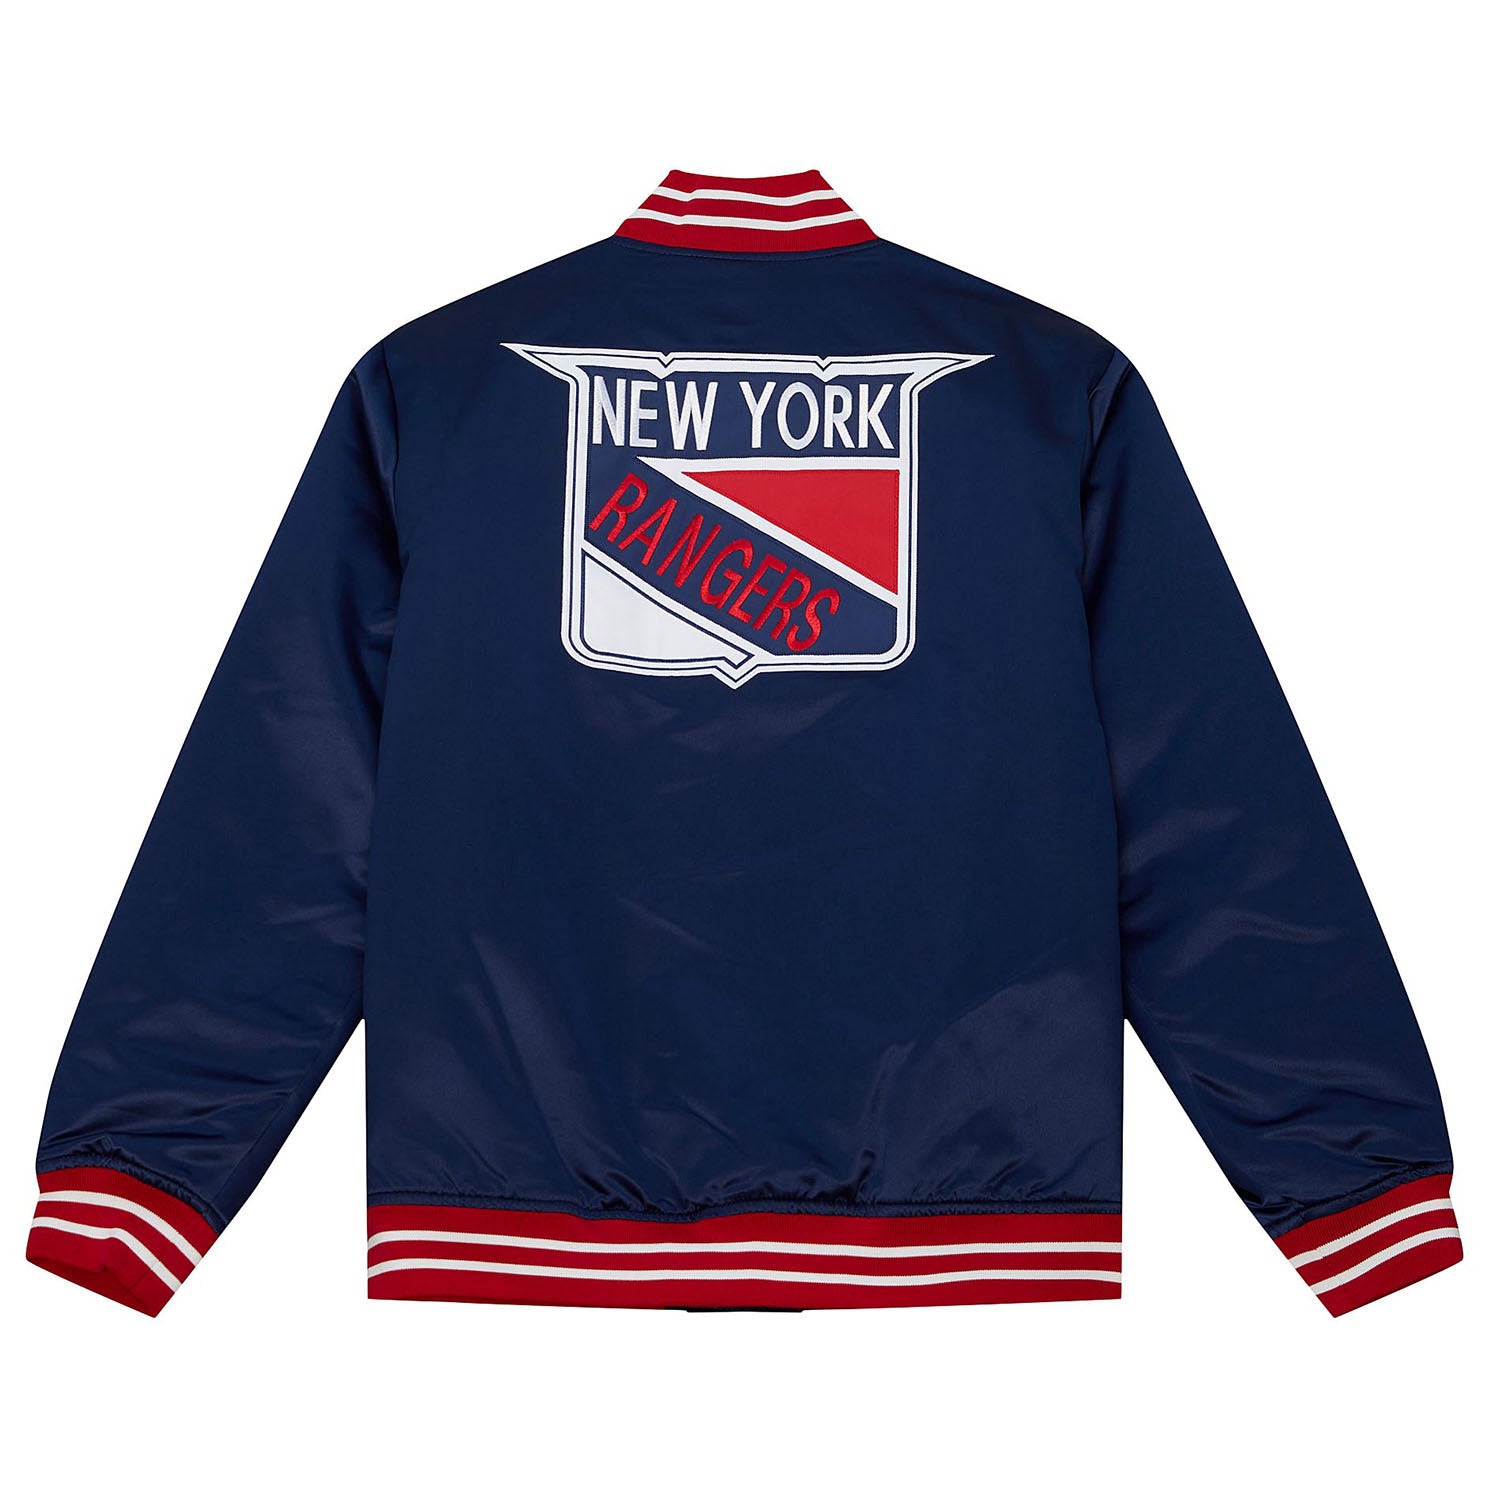 New York Rangers Hometown LW Satin Jacket By Mitchell & Ness - Mens